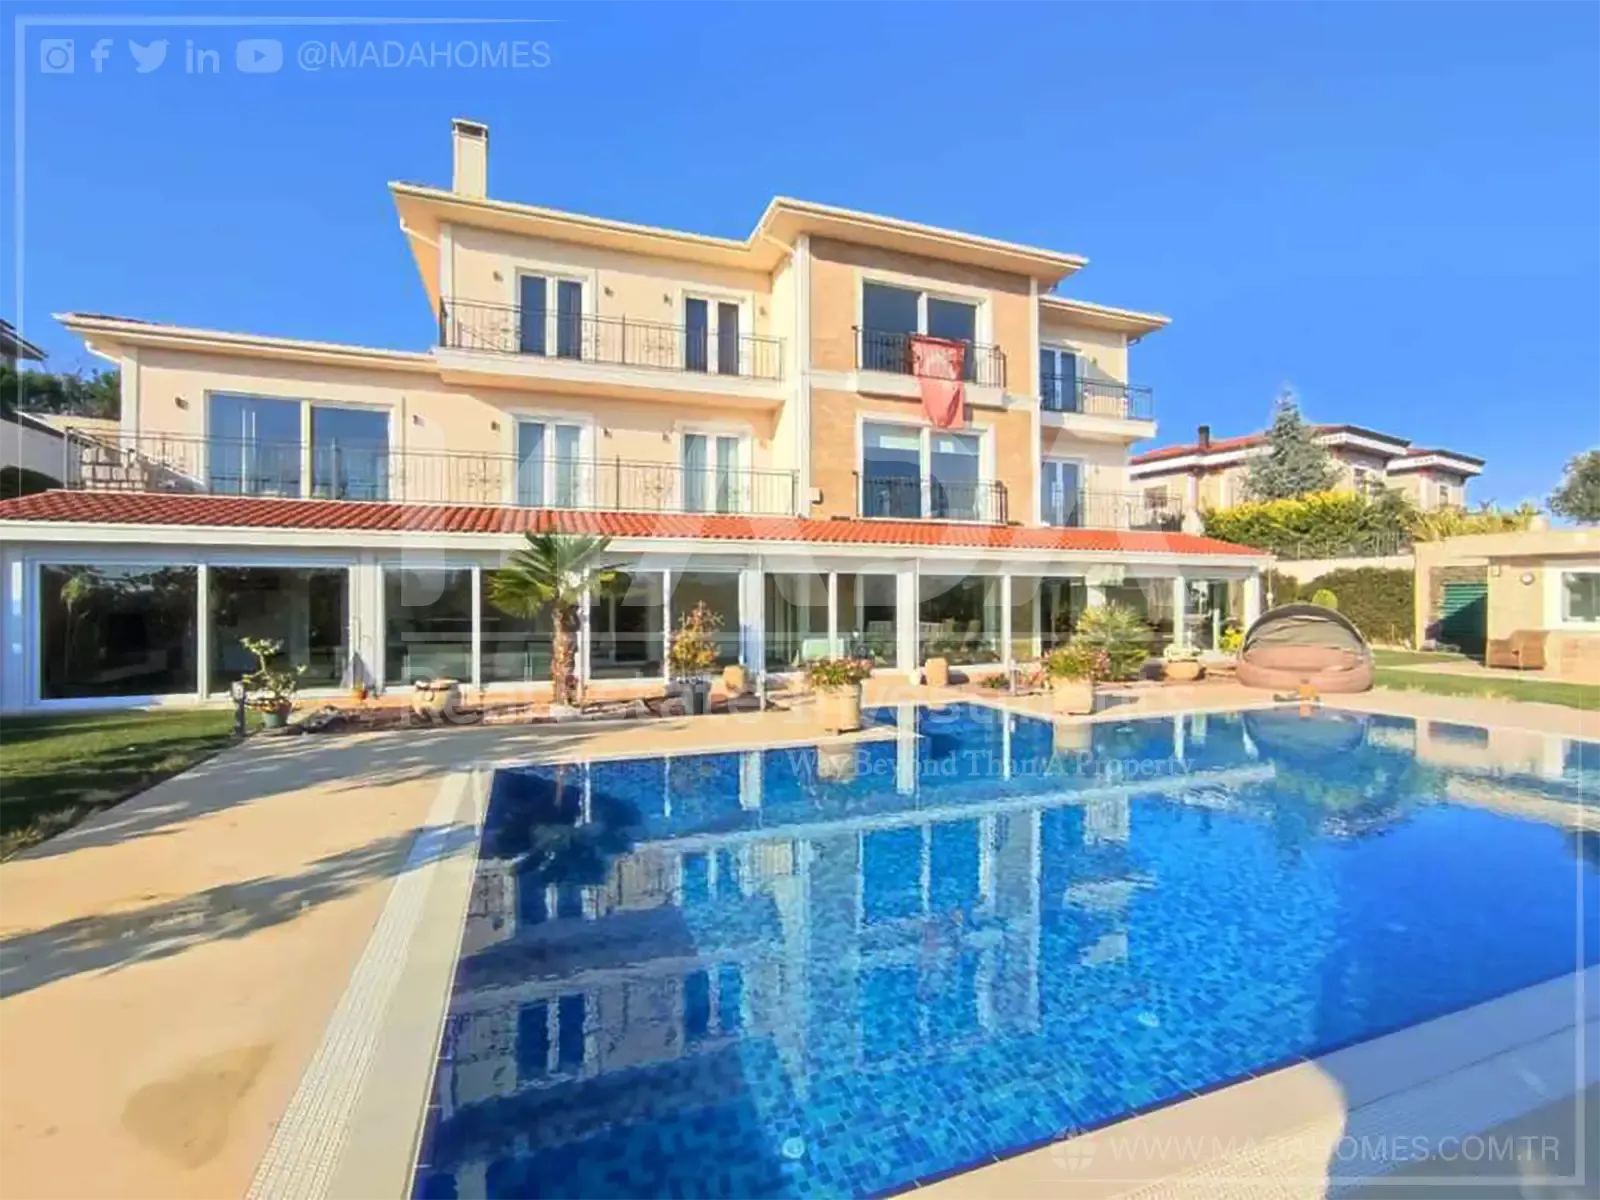 Villas for sale in Istanbul on the Bosphorus, get to know them